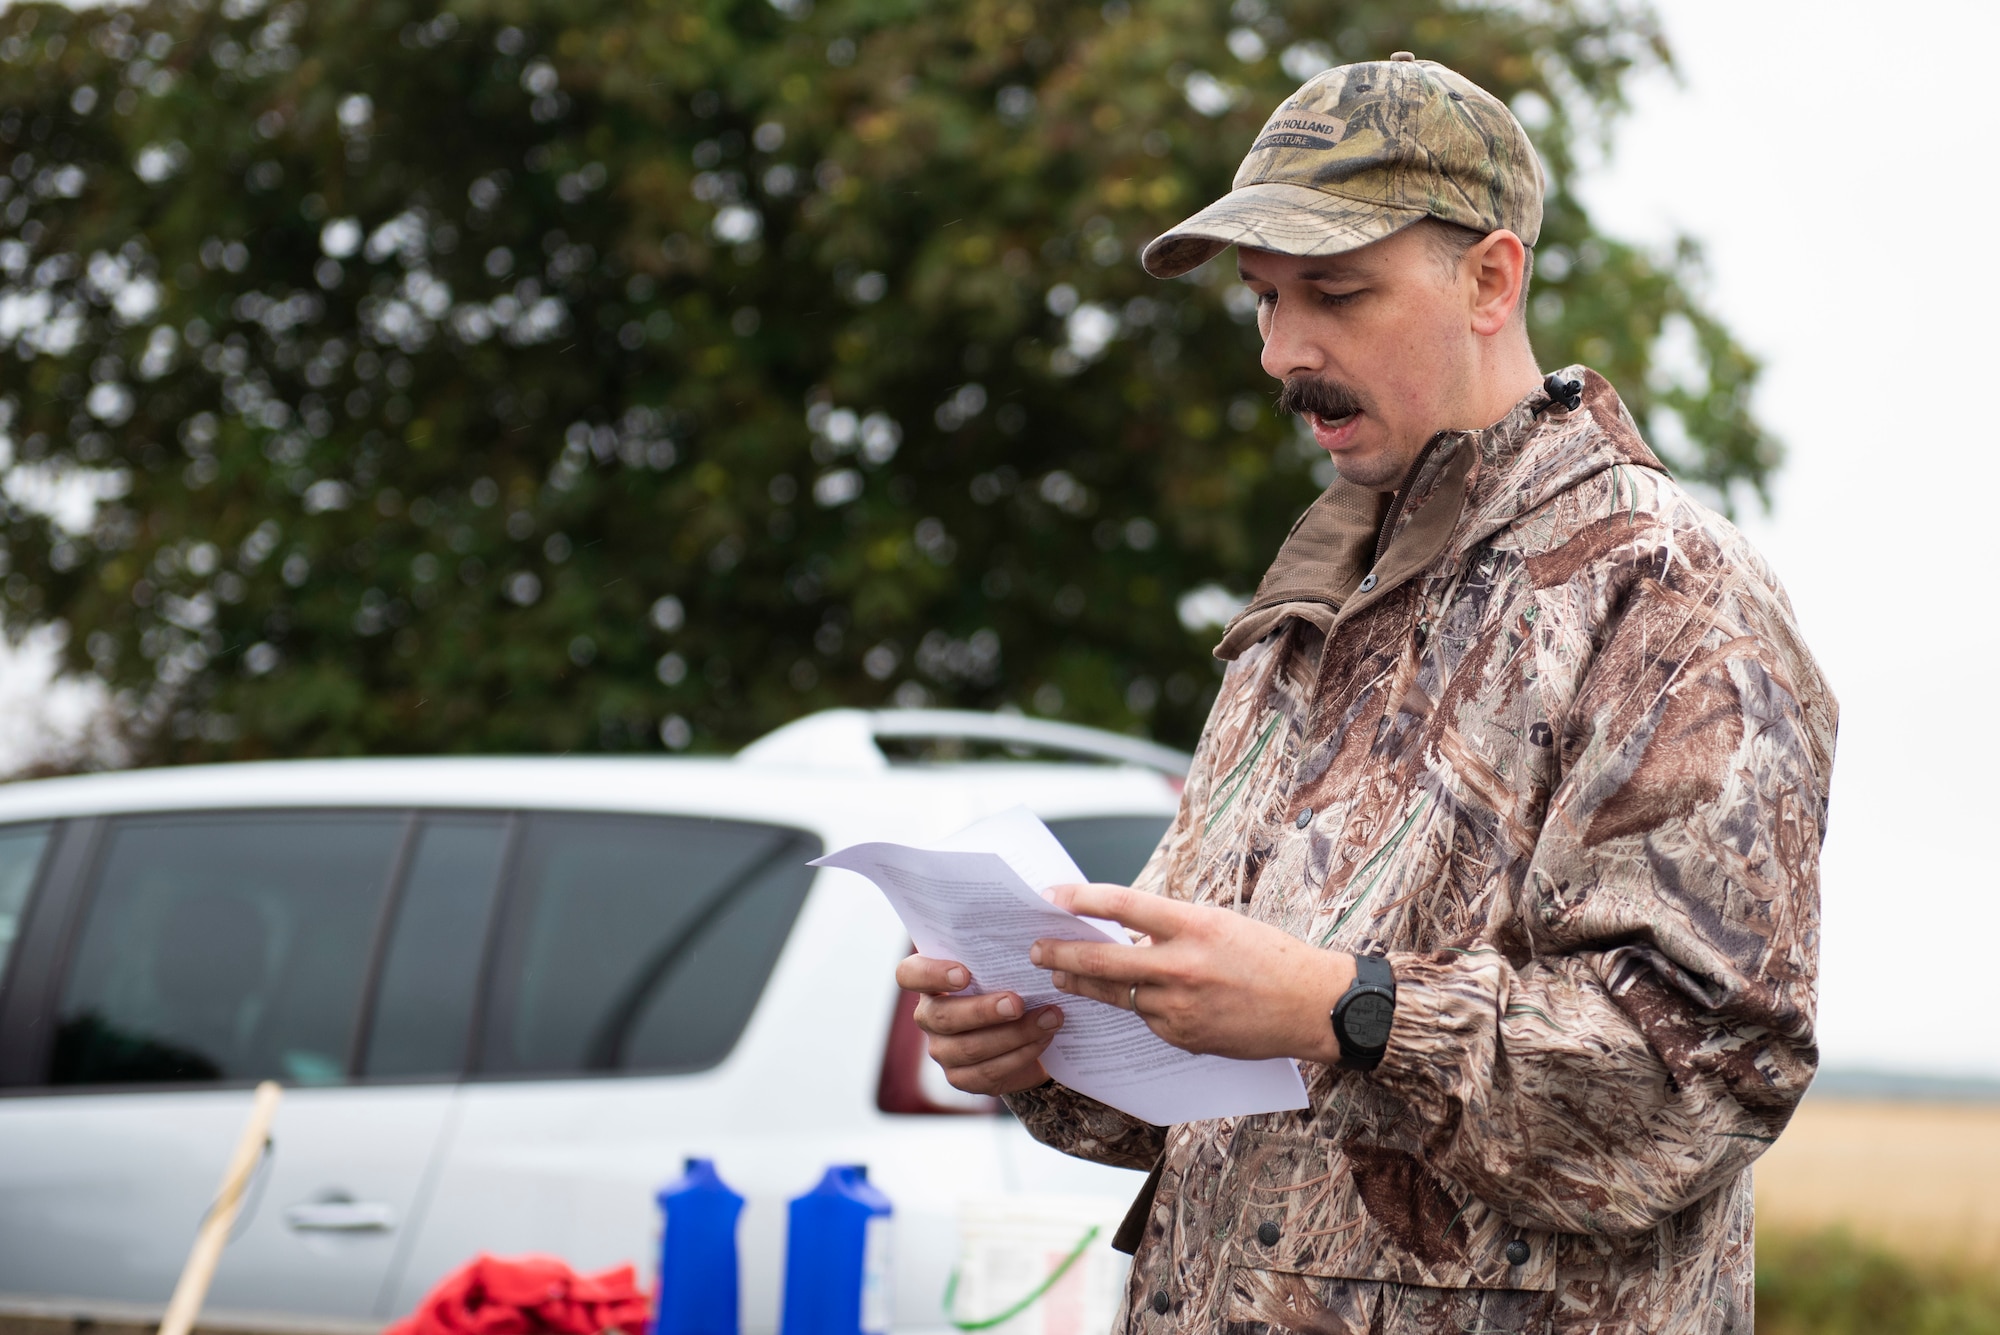 U.S. Air Force Master Sgt. Aaron Beil, U.S. Africa Command Directorate for Intelligence at RAF Molesworth technician, reads the history of the 355th Fighter Group Steeple Morden Memorial in Steeple Morden, England, during Operation TORCH-2020 memorial cleanup August 15, 2020. U.S. Africa Command Directorate for Intelligence at RAF Molesworth partnered with the American Battle Monuments Commission to host Operation TORCH-2020, where over 50 military members and their families, U.K. nationals and Boy Scout Troop #245, cleaned six WWII memorial sites to preserve American service member legacies and promote an appreciation of past American heroes among present-day USAFRICOM workforce and families. (U.S. Air Force Photo by Airman 1st Class Jennifer Zima)